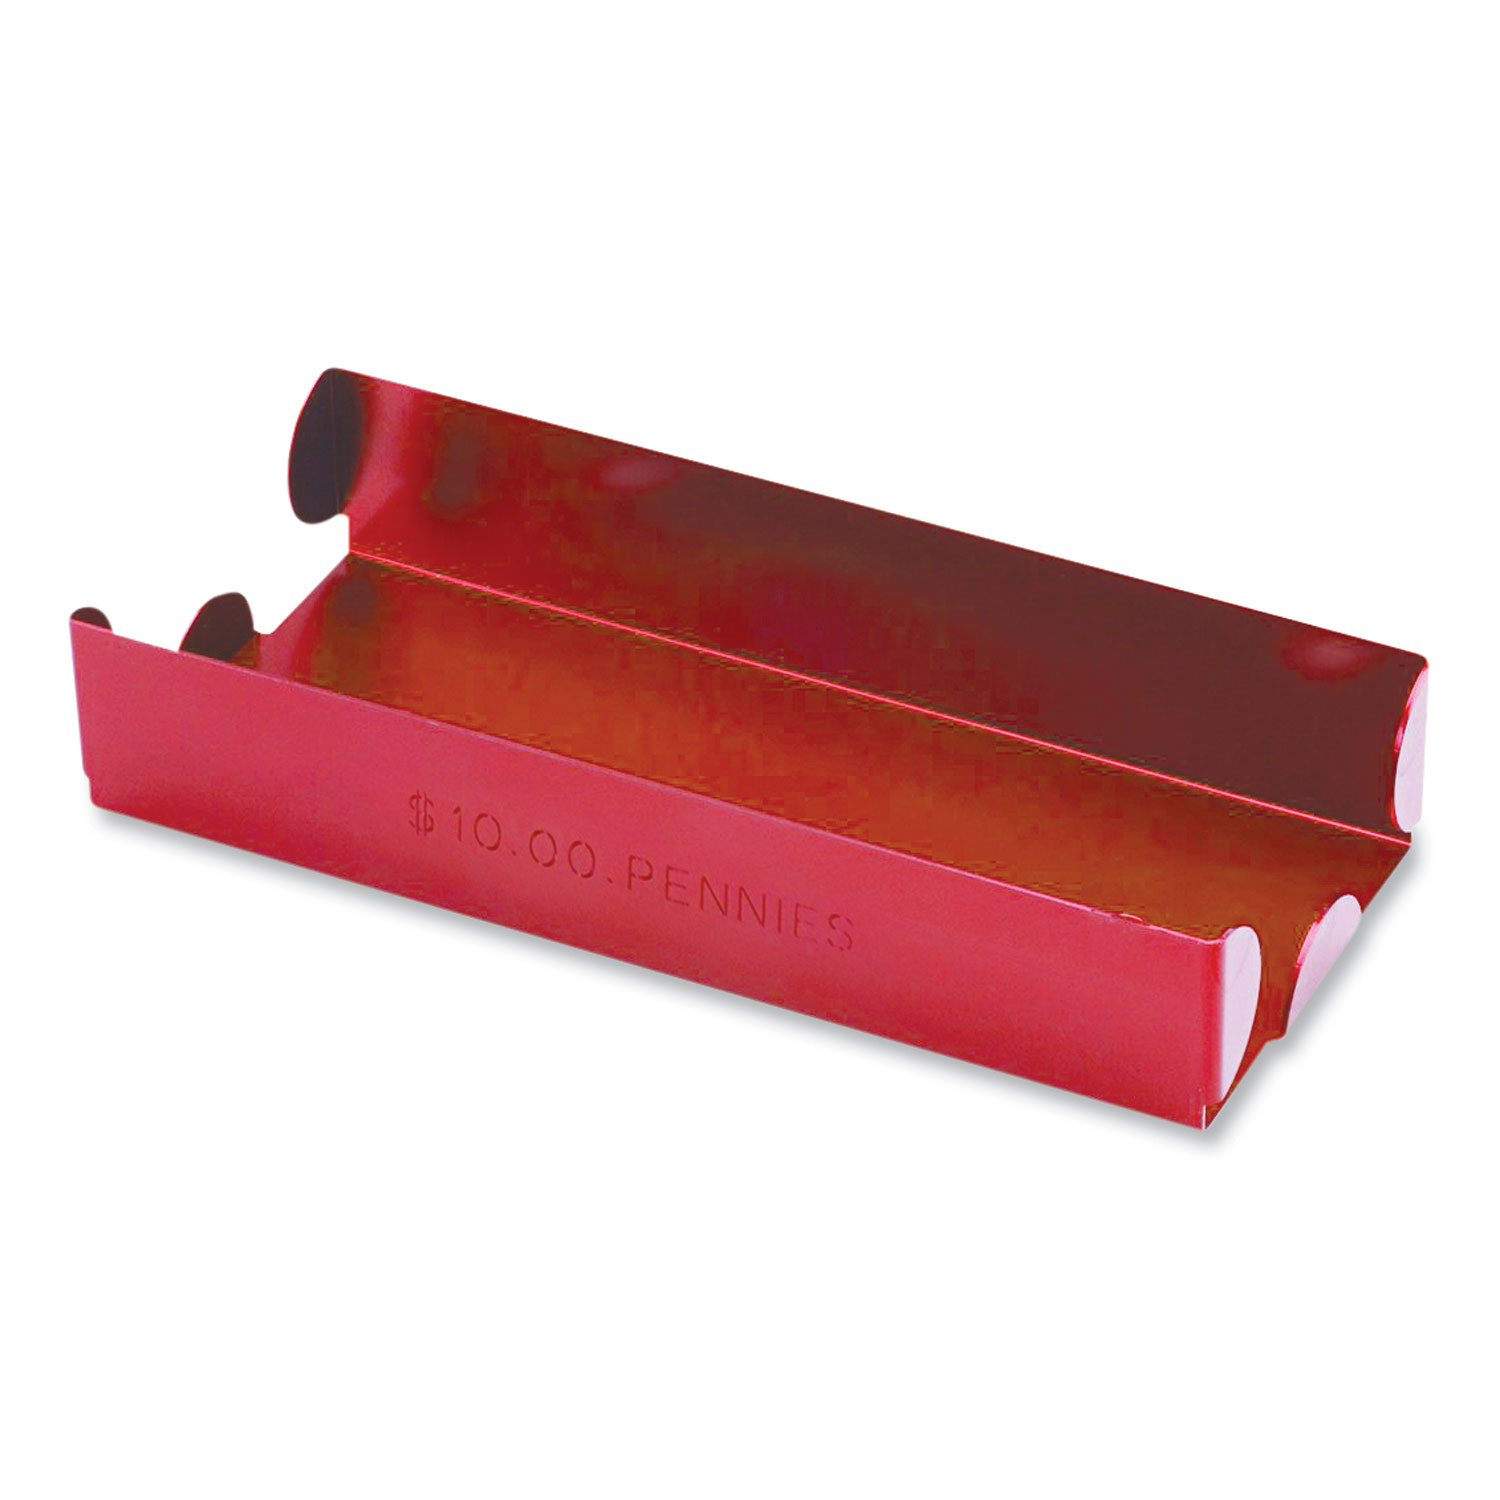  CONTROLTEK 560065 Metal Coin Tray, Pennies, 3.5 x 10 x 1.75, Red (CNK560065) 